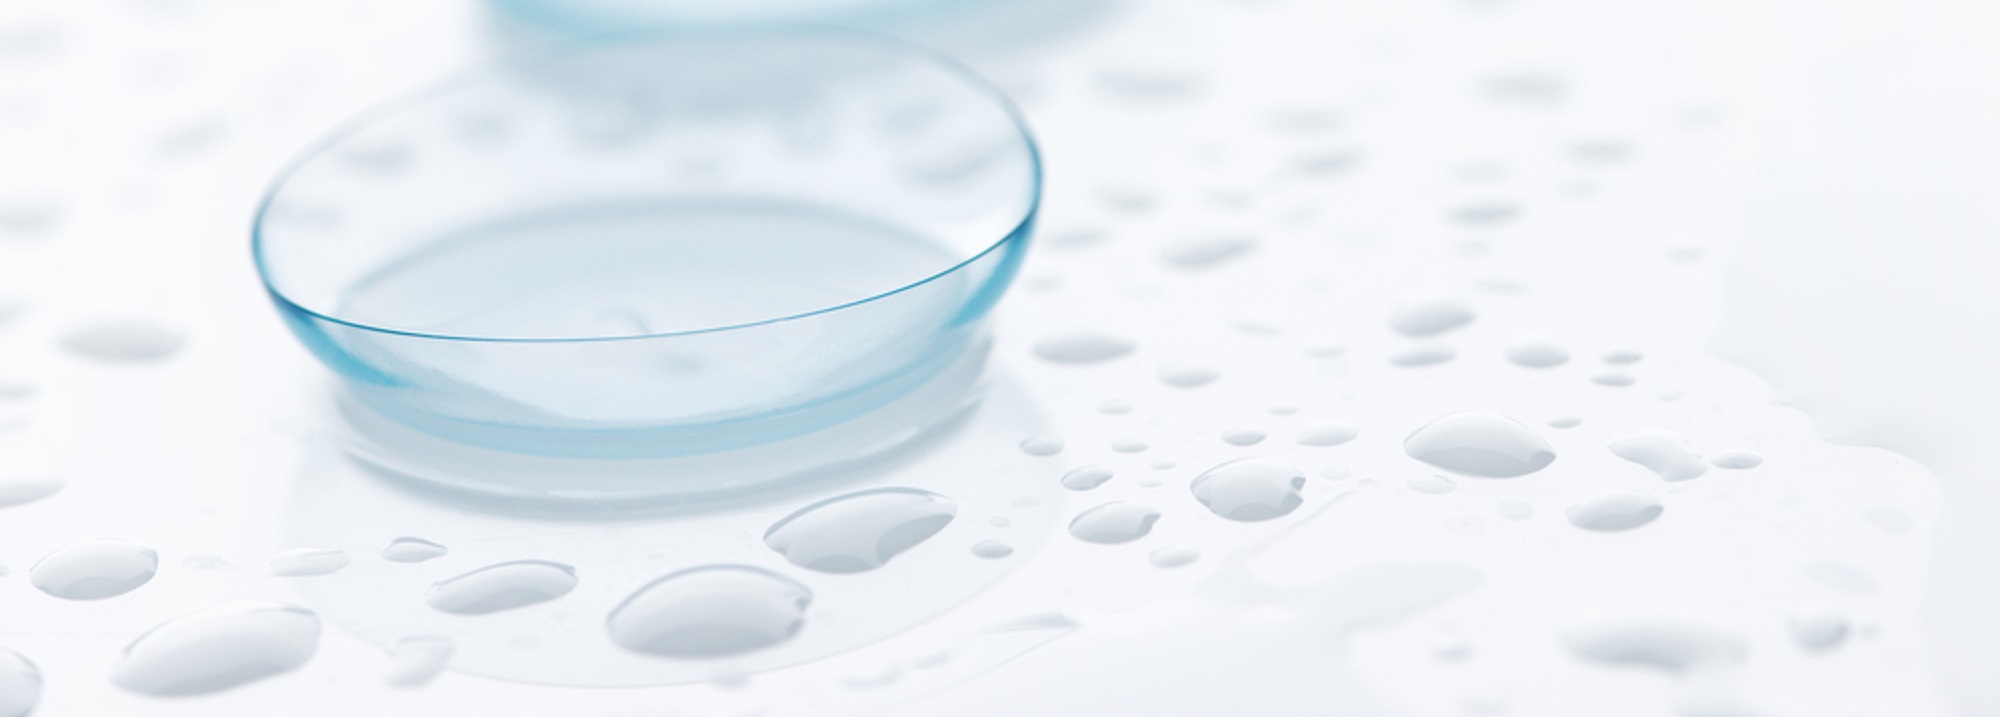 a contact lens on a surface with some water droplets